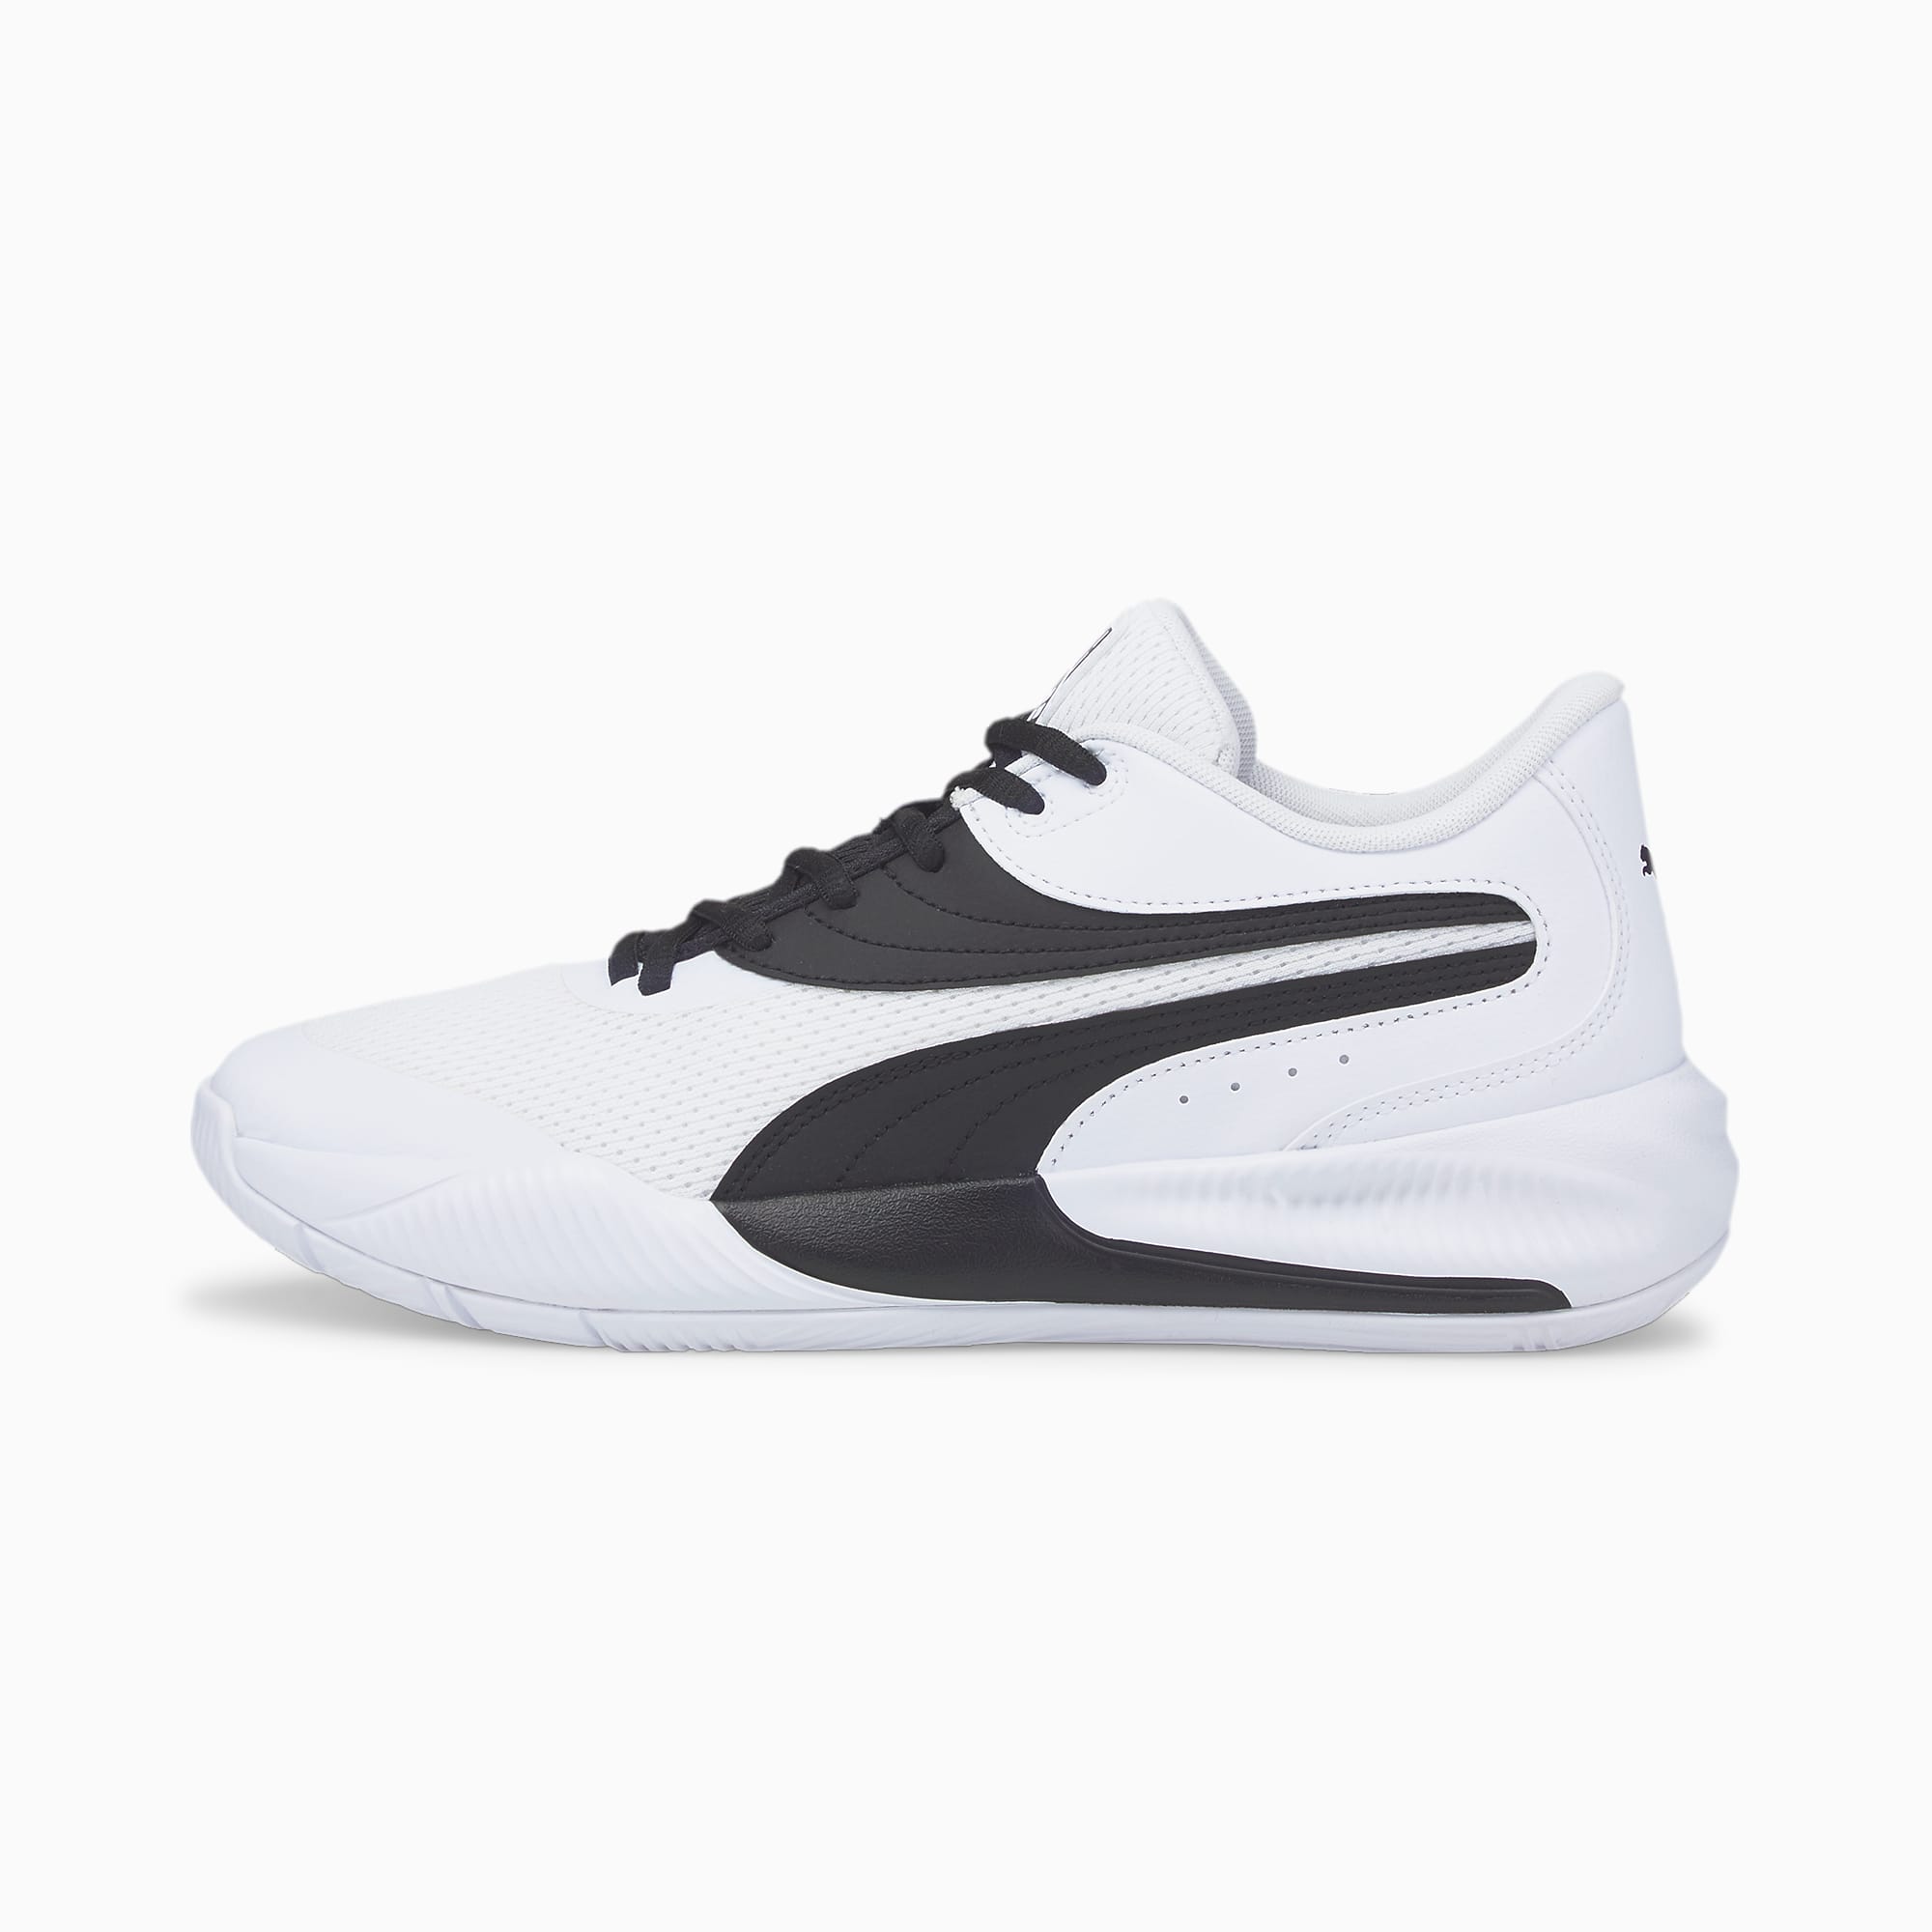 Puma Basketball Shoes White And Black | vlr.eng.br